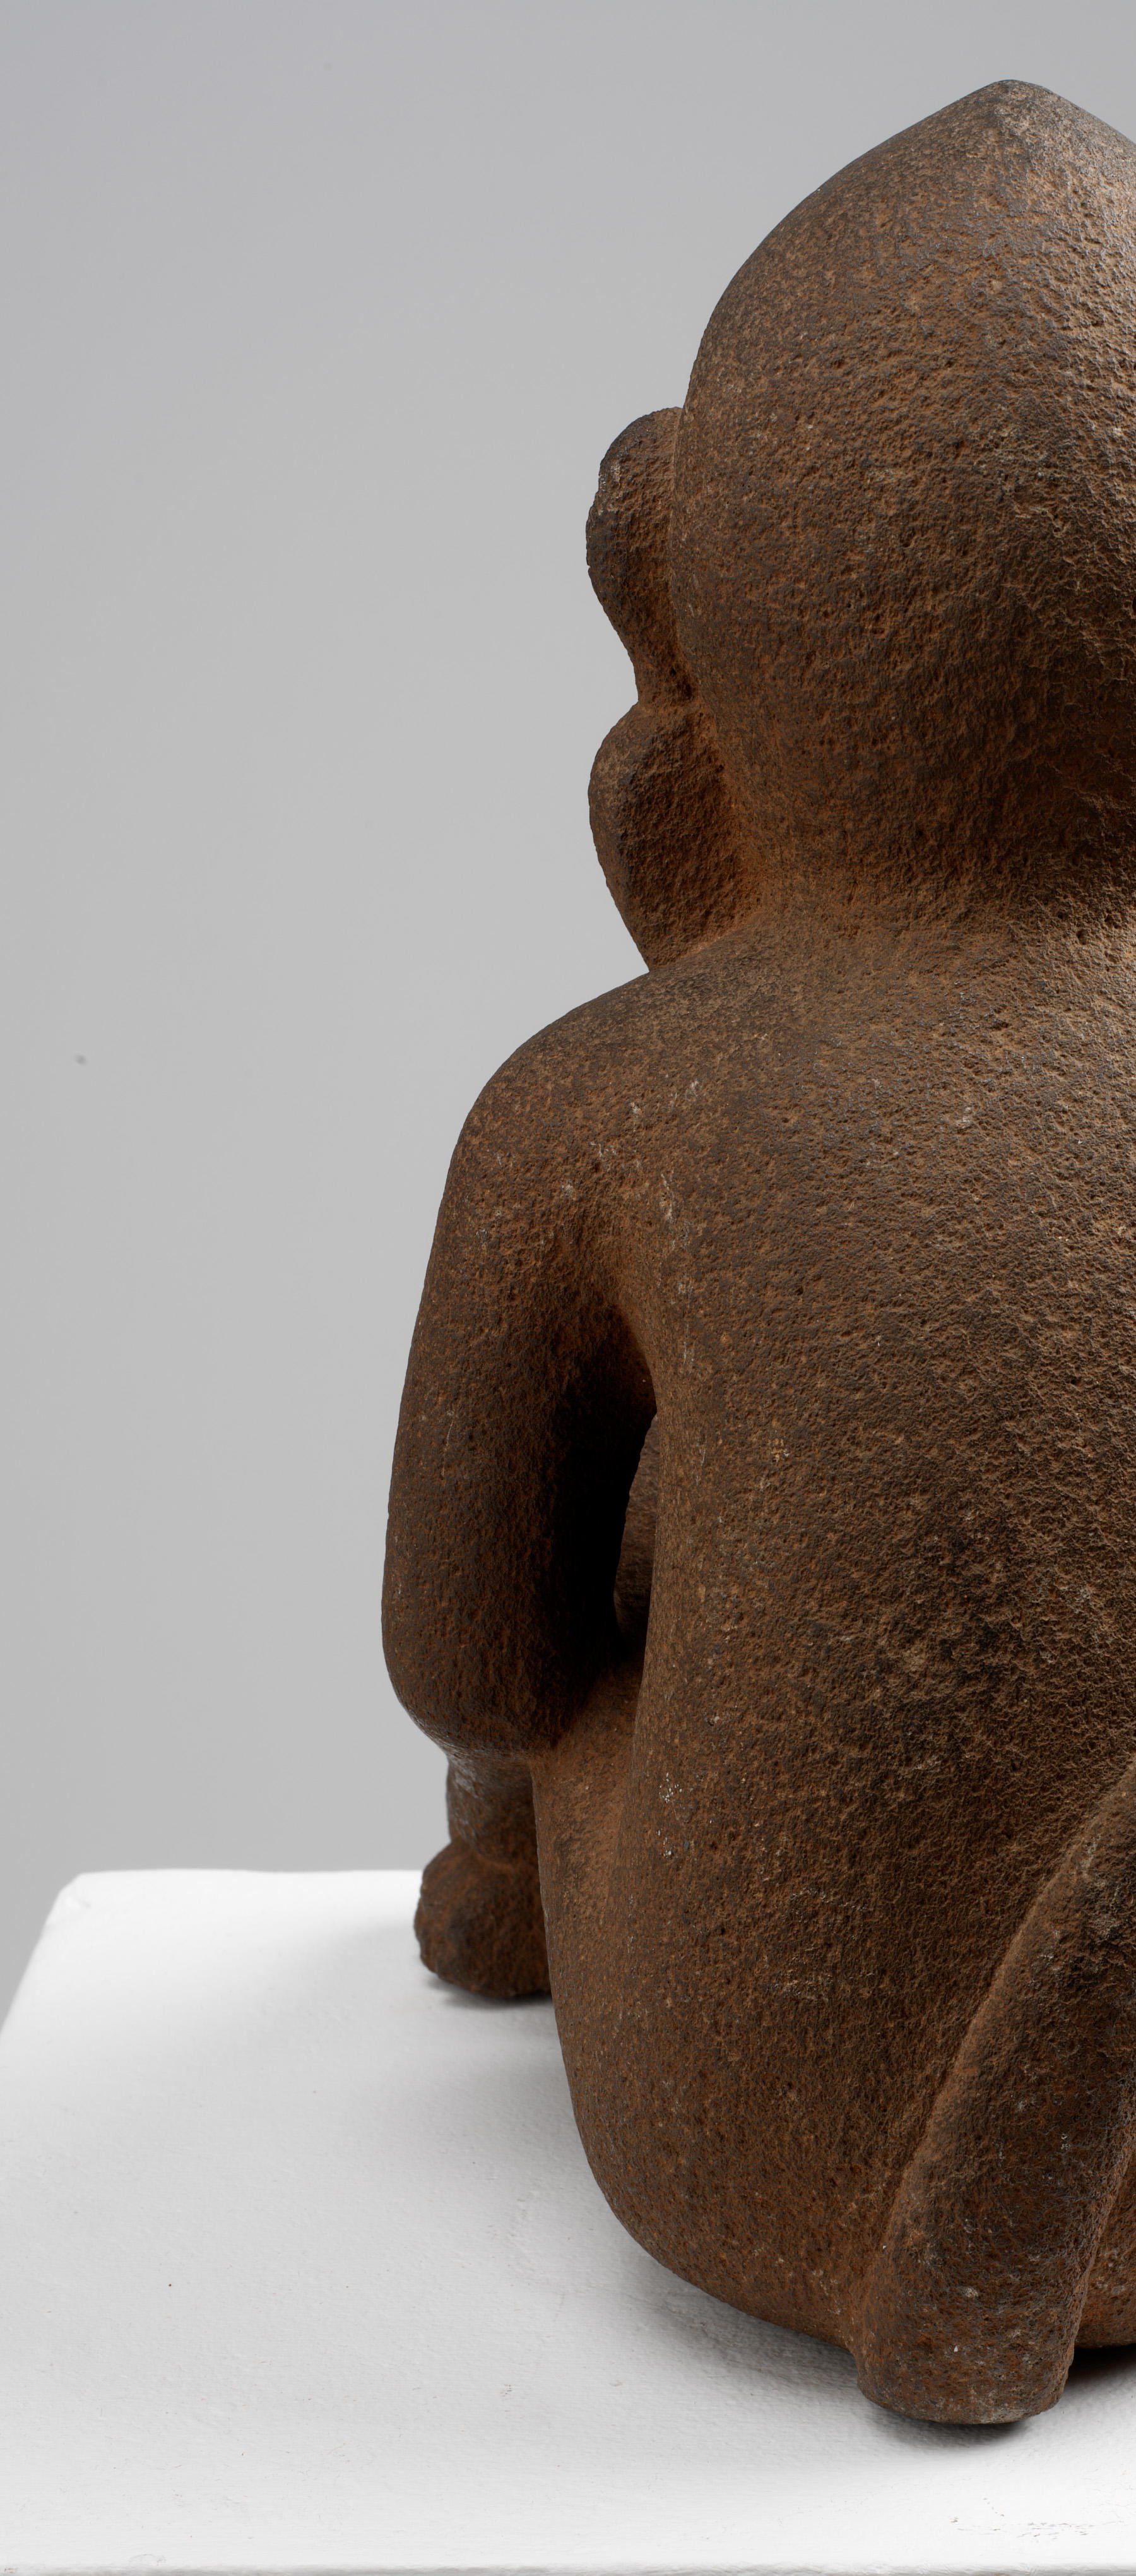 Cutoff back-view of the brown monkey sculpture’s left side. Its earrings are attached to the ear, and its tail goes upwards. The monkey’s texture is rough and porous.